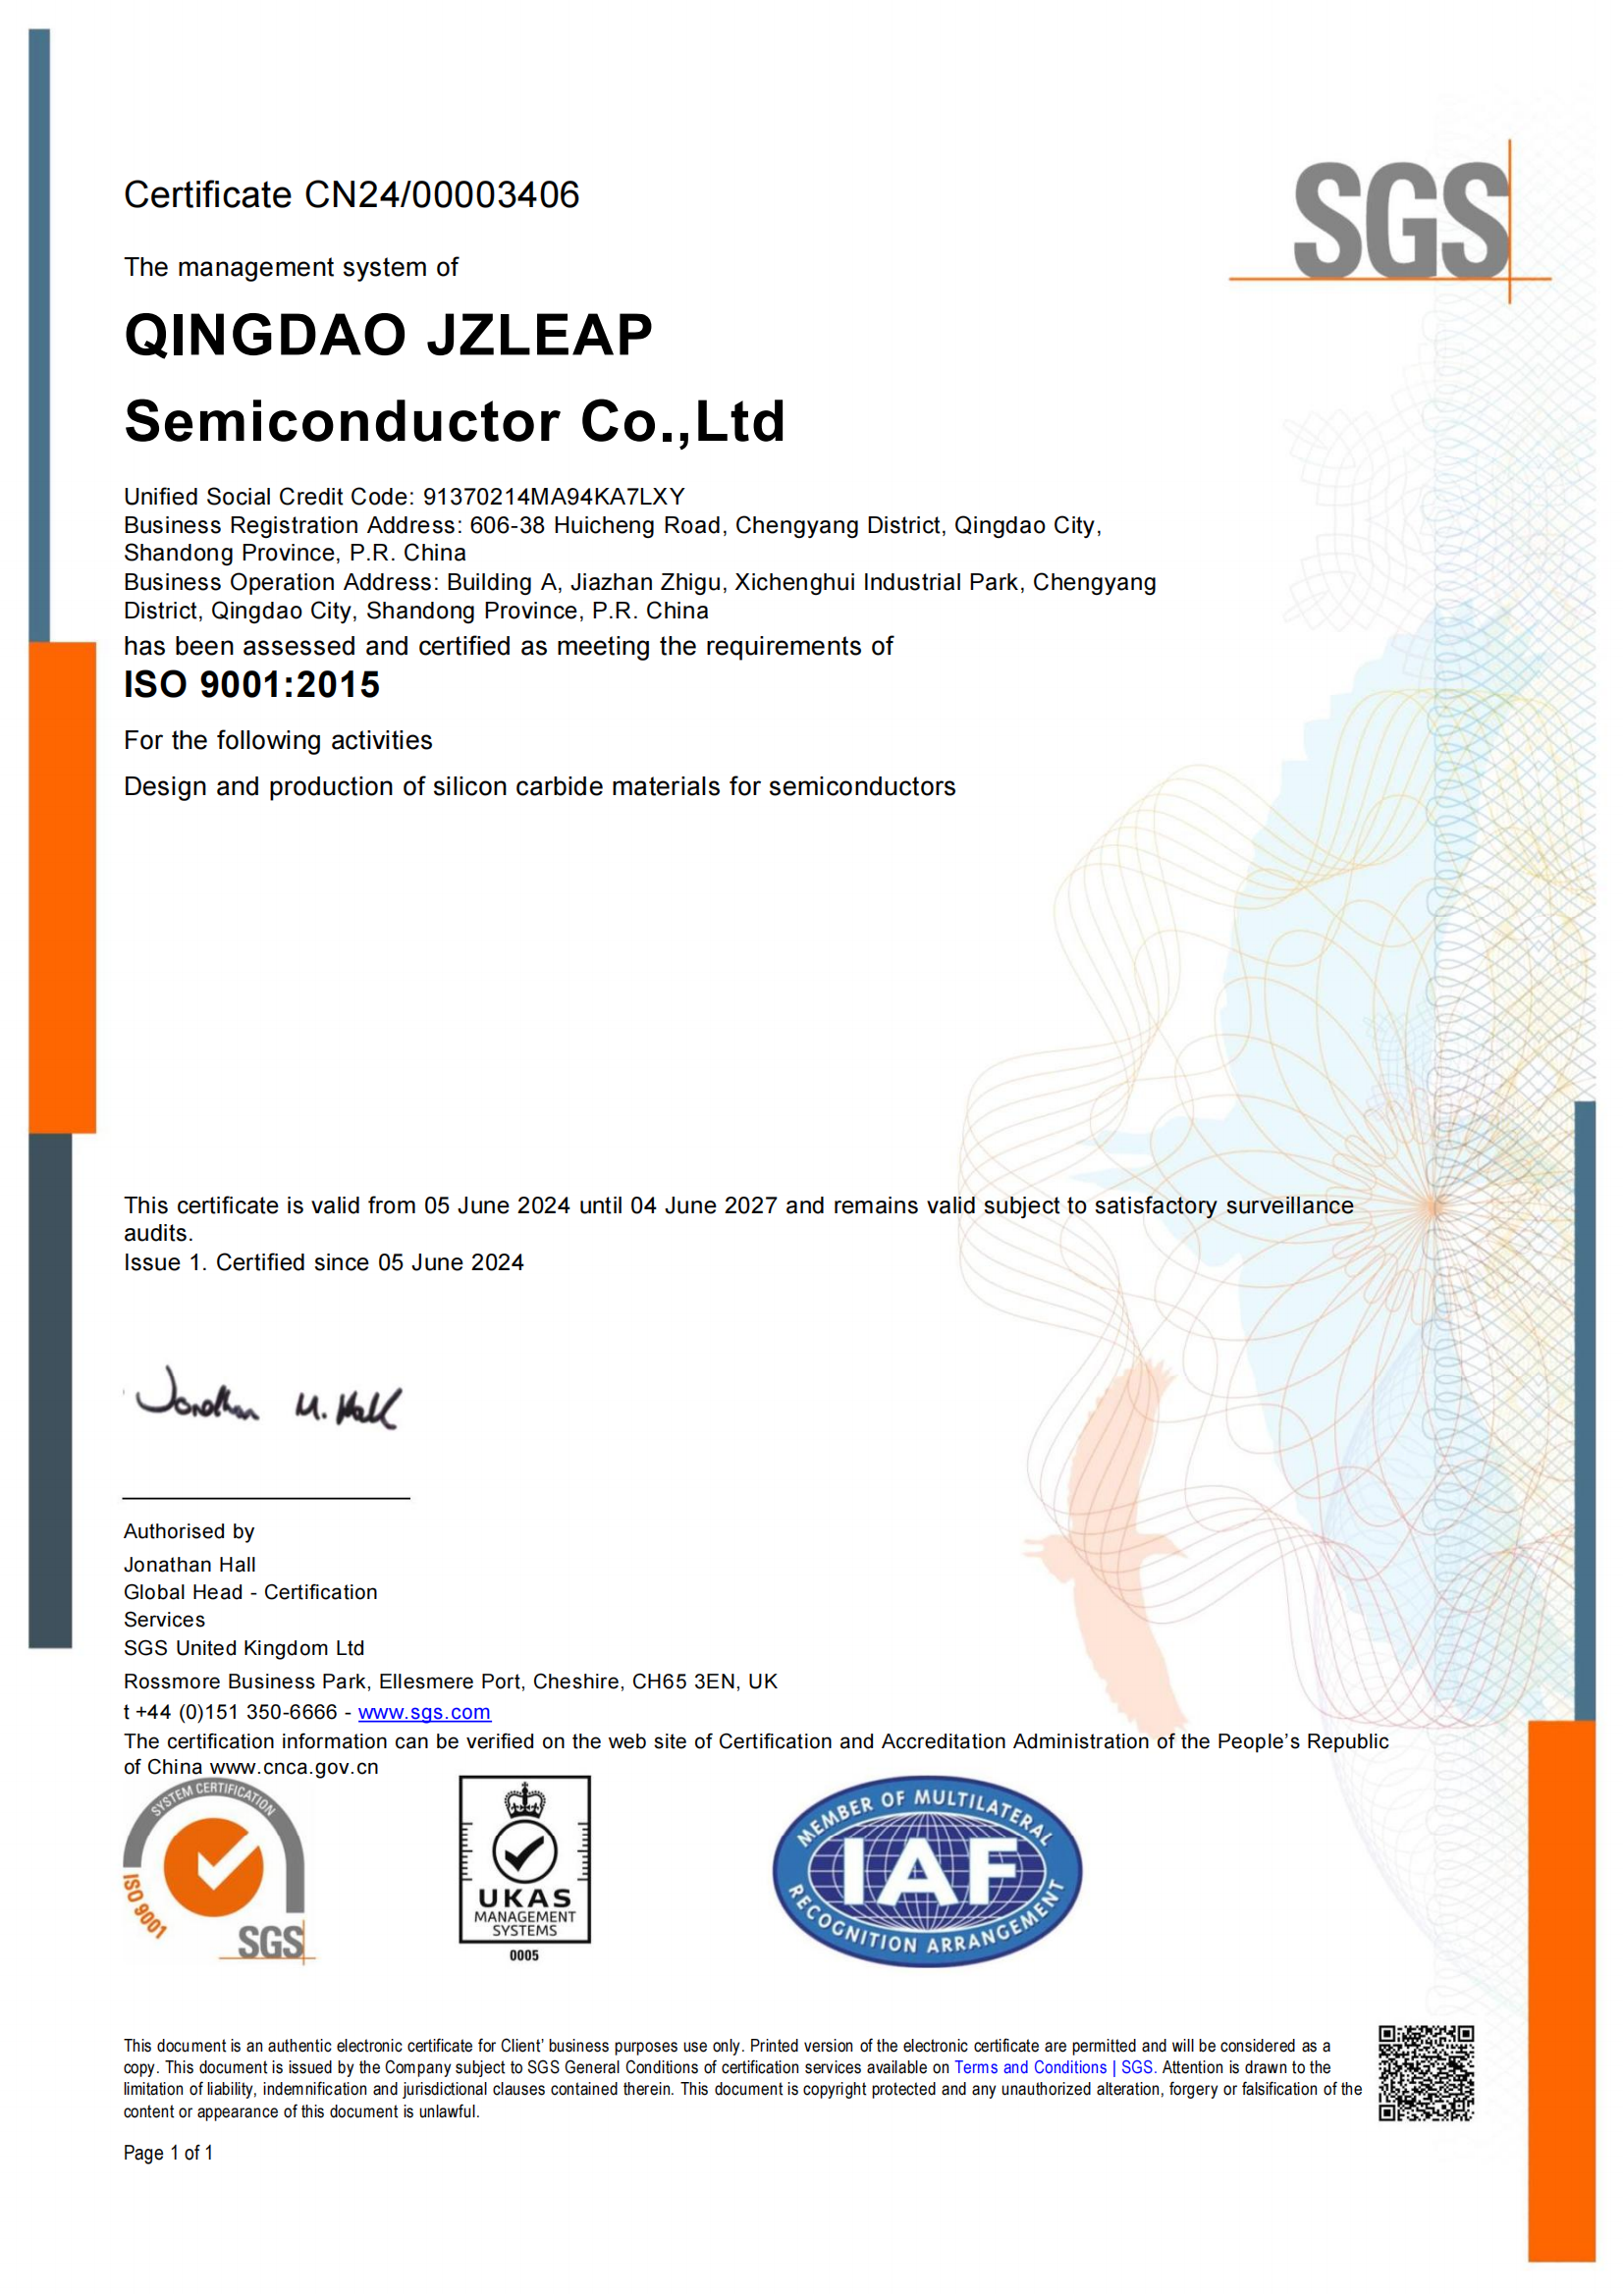 JZLEAP Successfully Obtained ISO9001: 2015 Quality Management System Certification